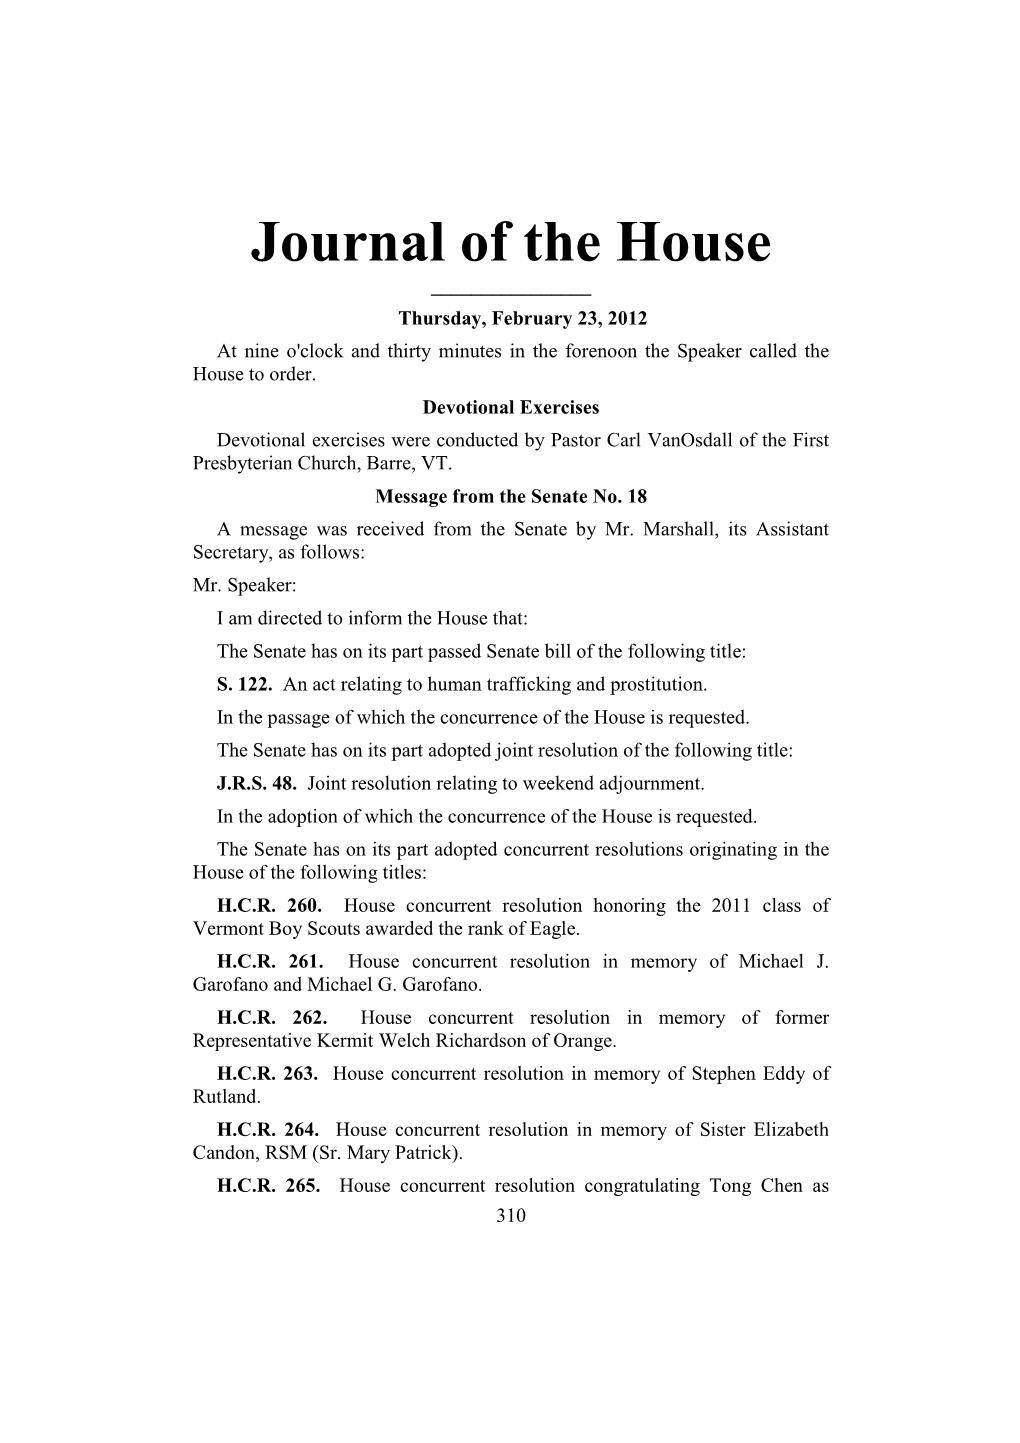 Journal of the House ______Thursday, February 23, 2012 at Nine O'clock and Thirty Minutes in the Forenoon the Speaker Called the House to Order